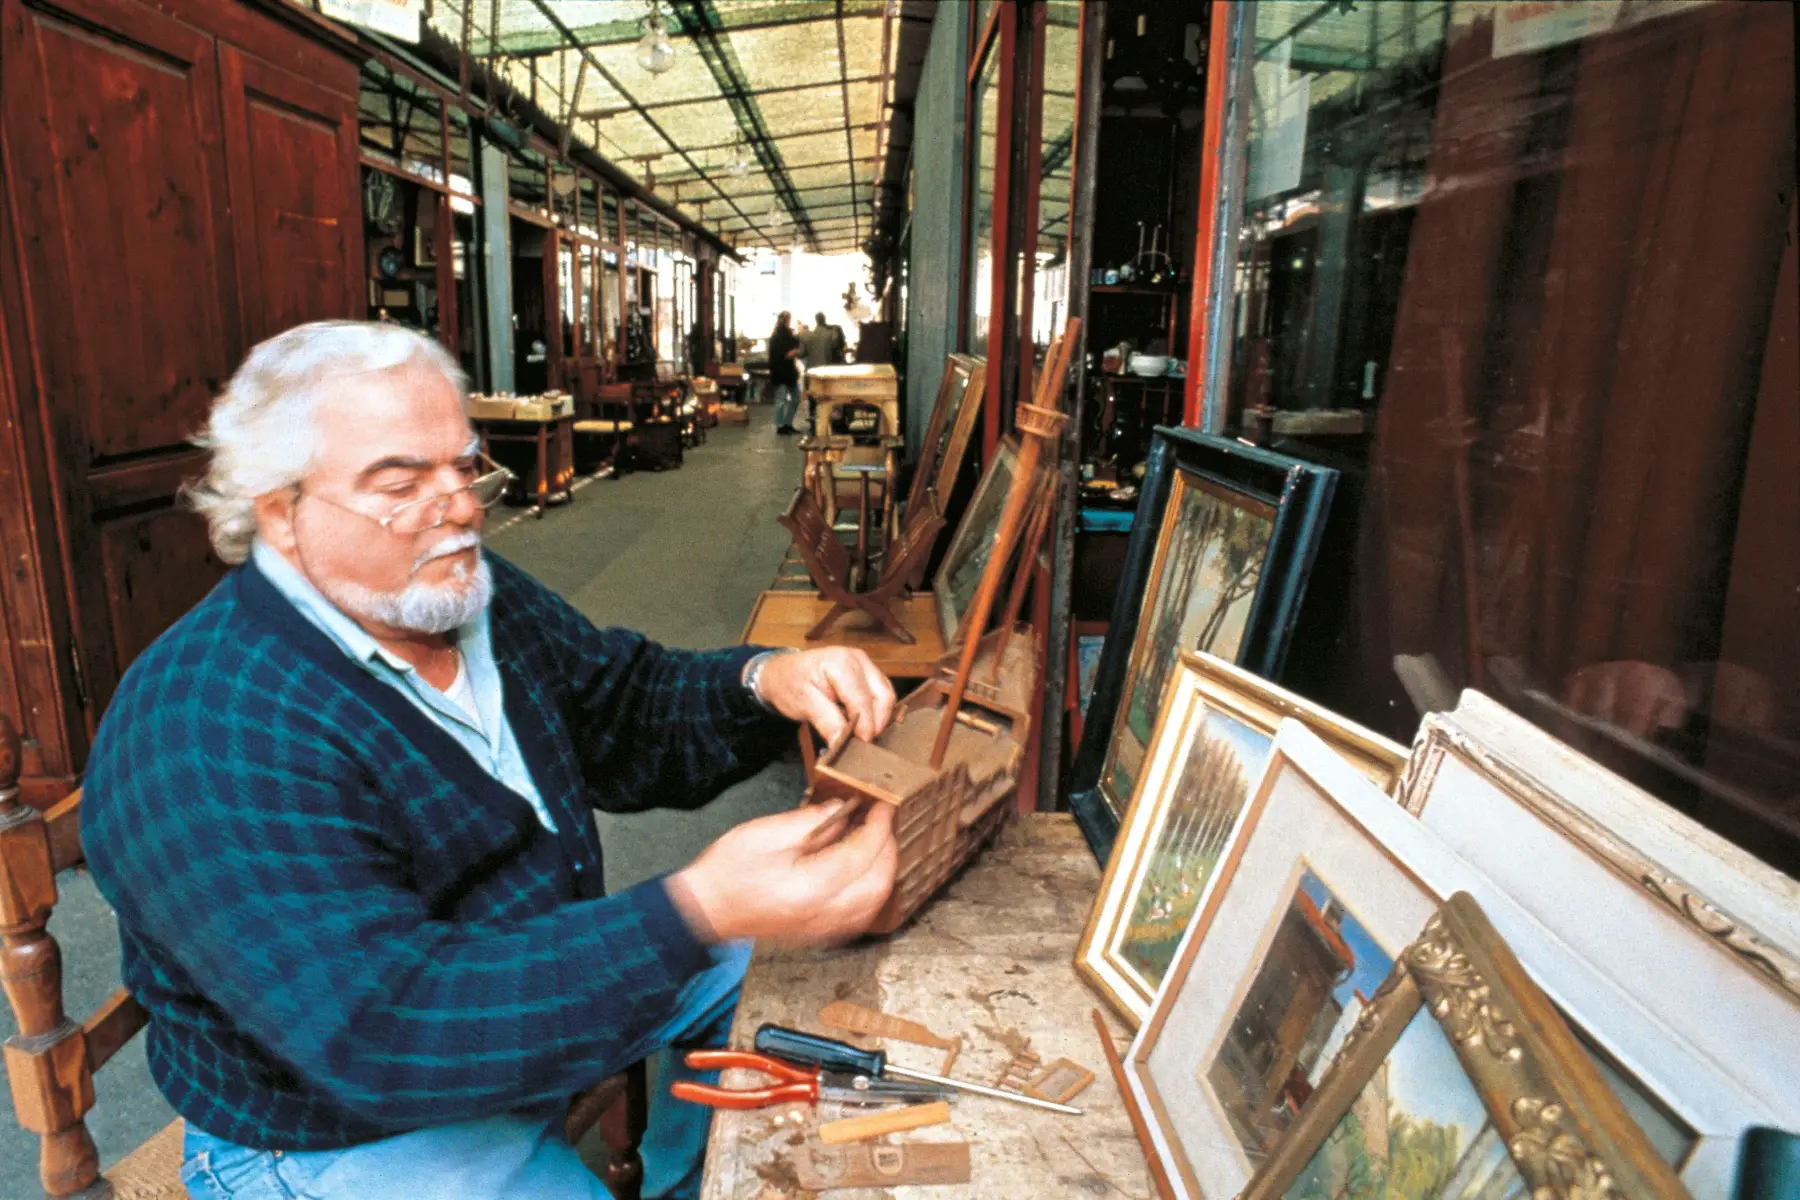 Artisan building a model of wooden ship at his stall in the flea market (Piazza dei Ciompi)